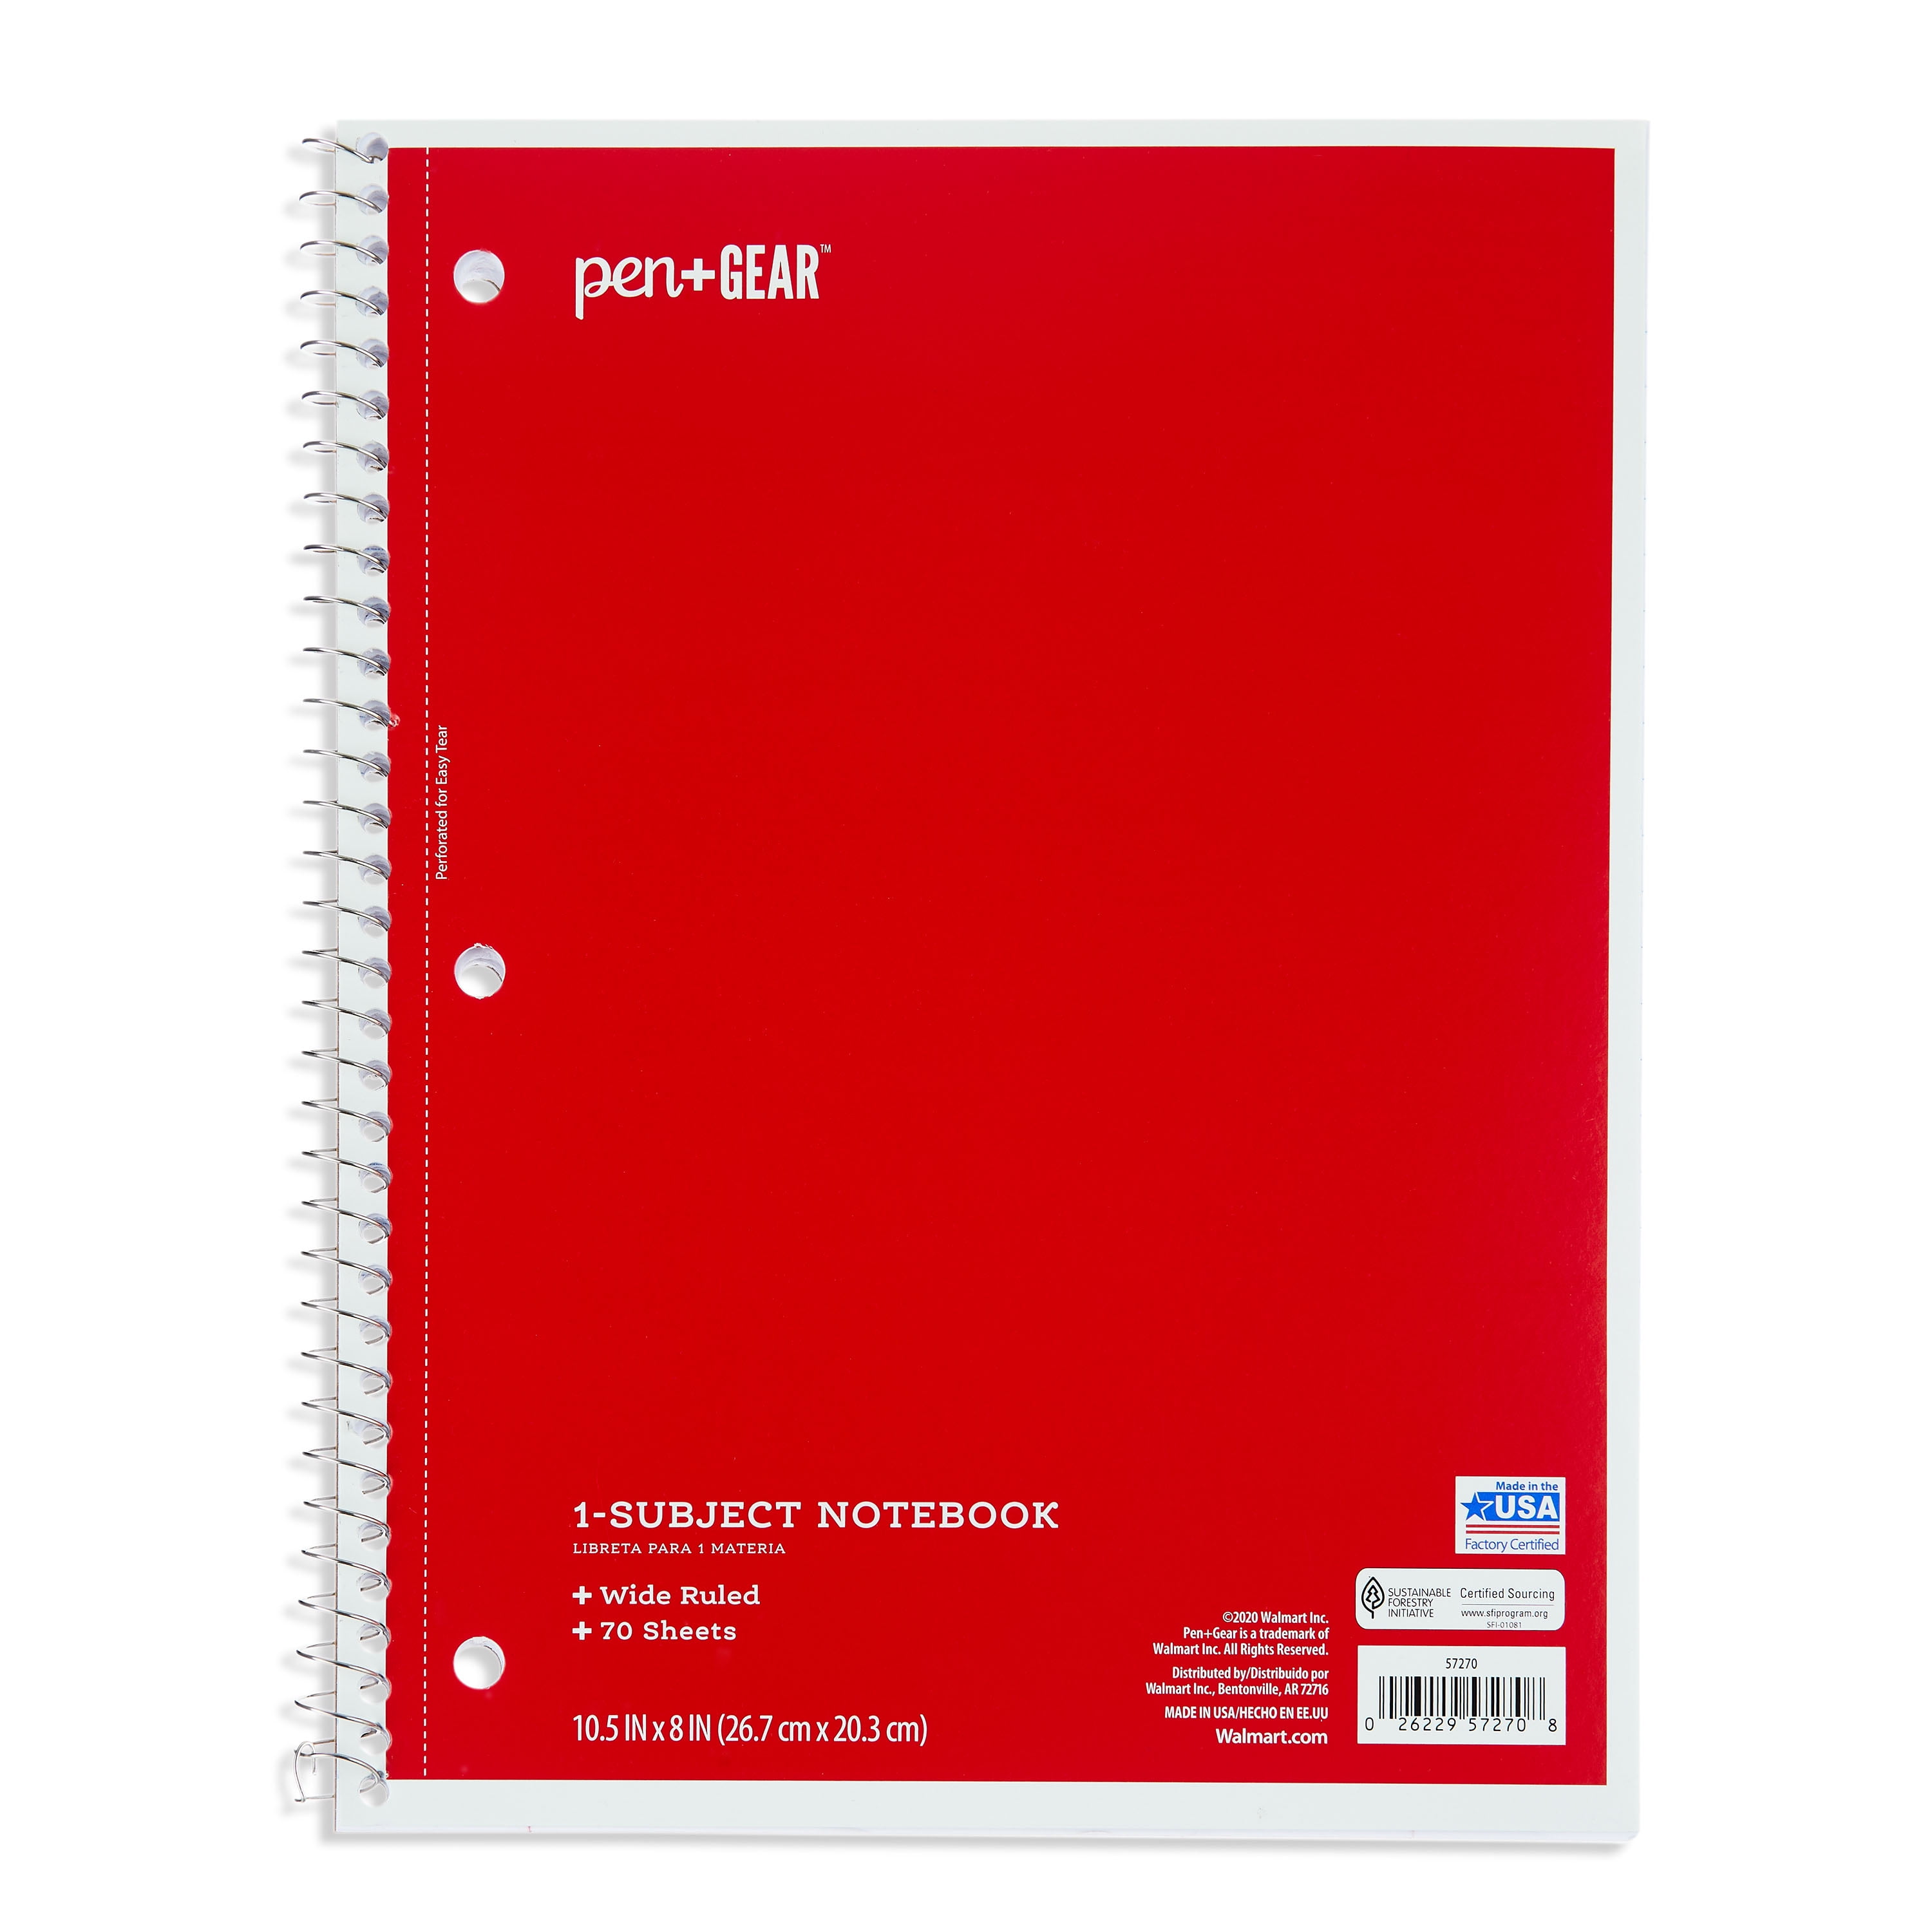 Pen+Gear 1-Subject Notebook, Wide Ruled, 70 Sheets, Red